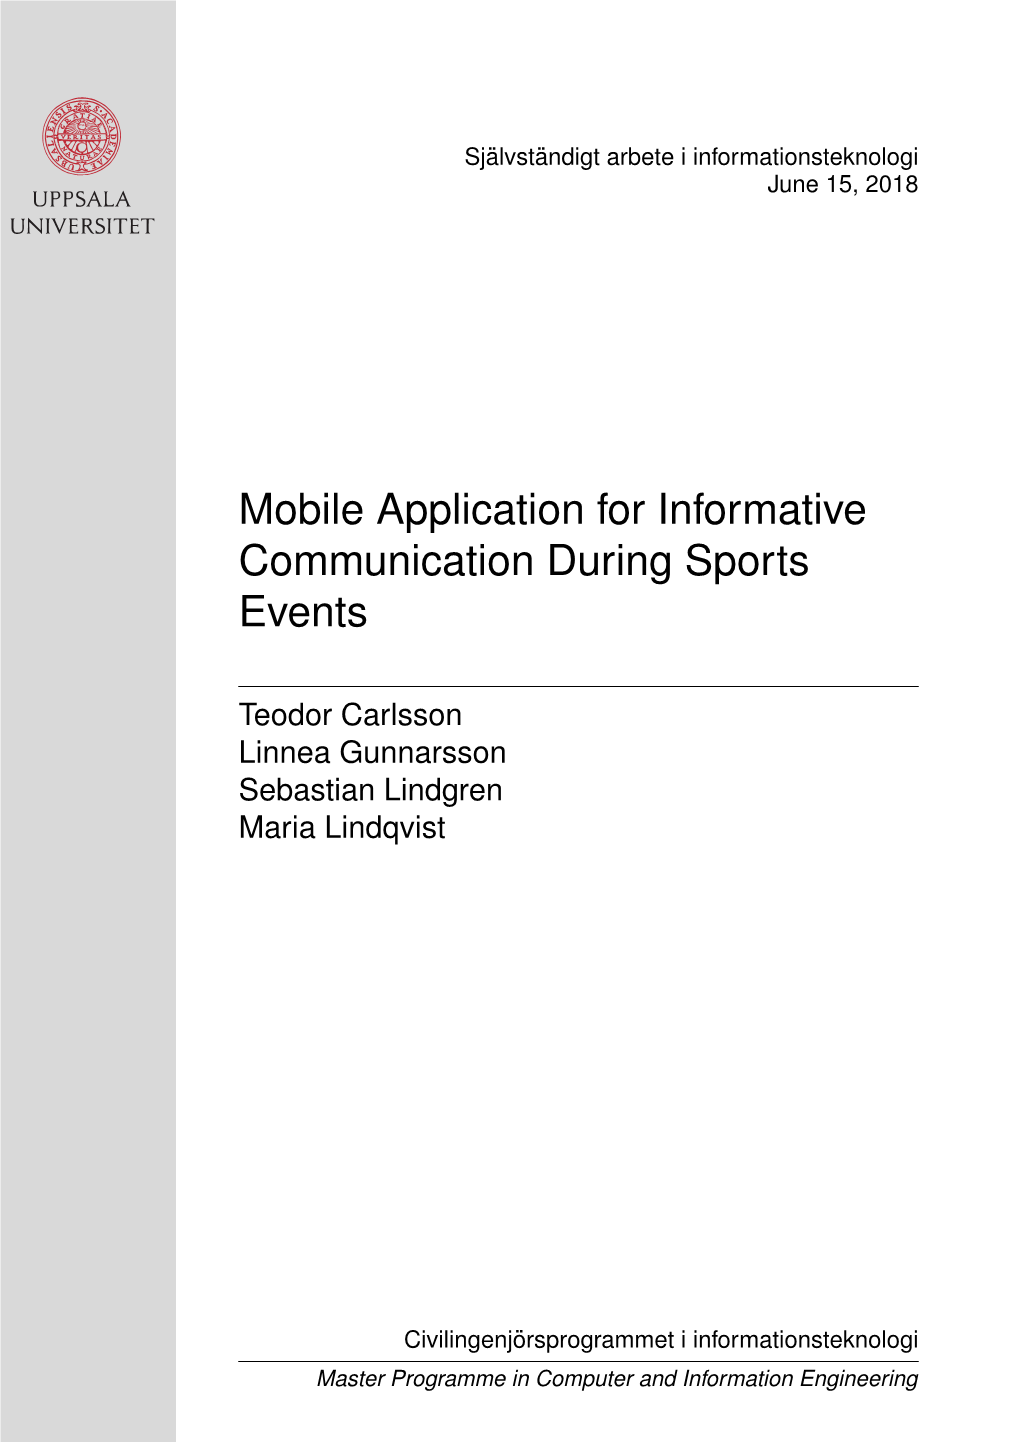 Mobile Application for Informative Communication During Sports Events